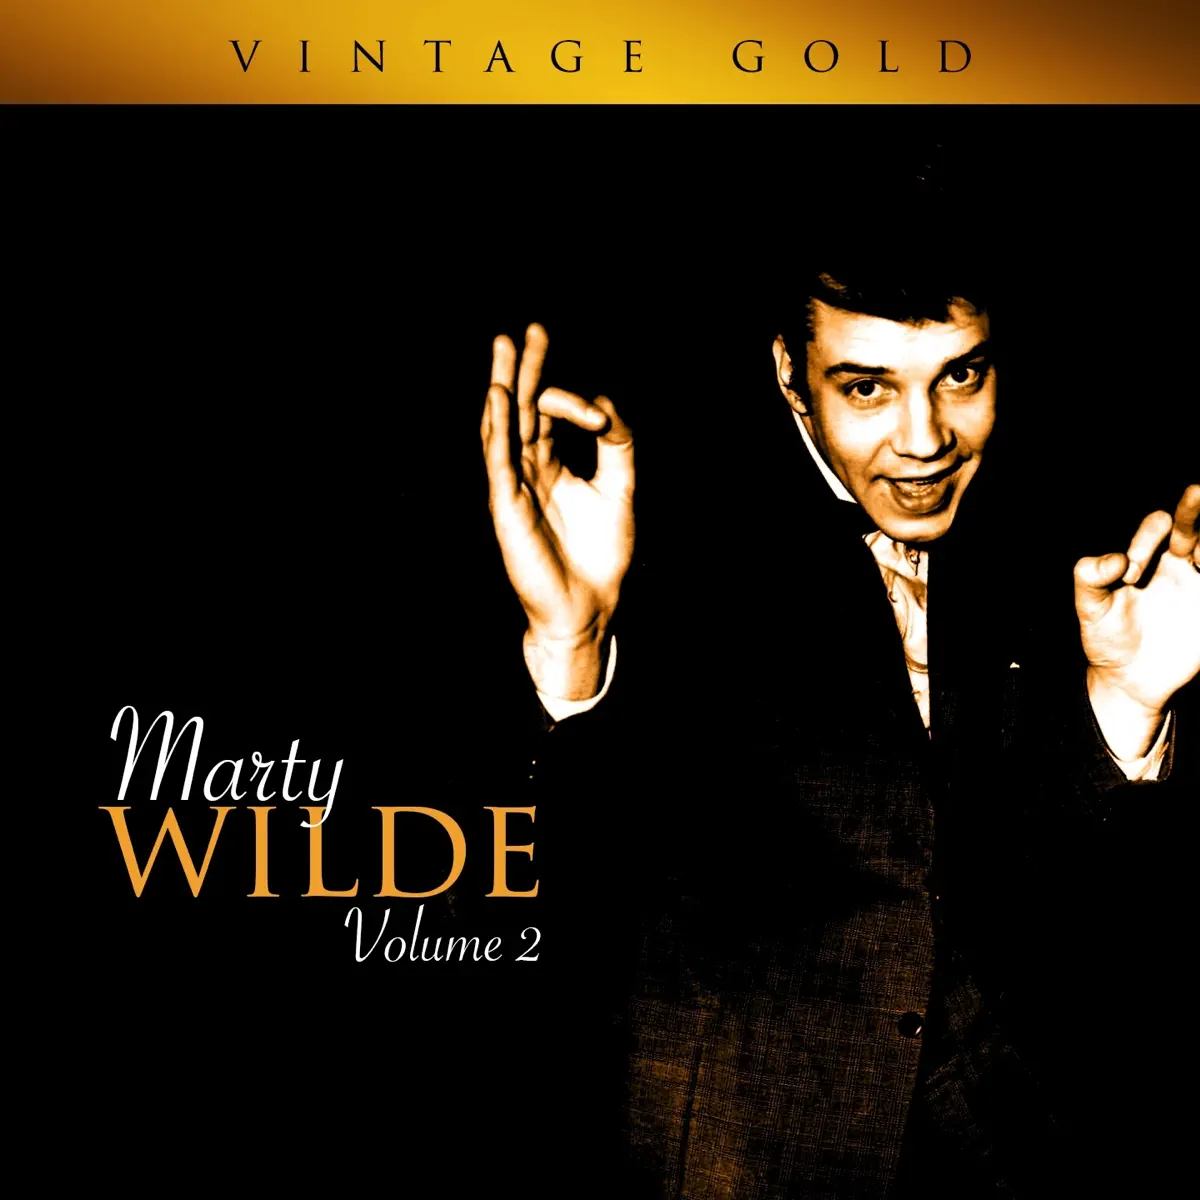 Marty Wilde - Vintage Gold, Vol. 2 (2014) [iTunes Plus AAC M4A]-新房子